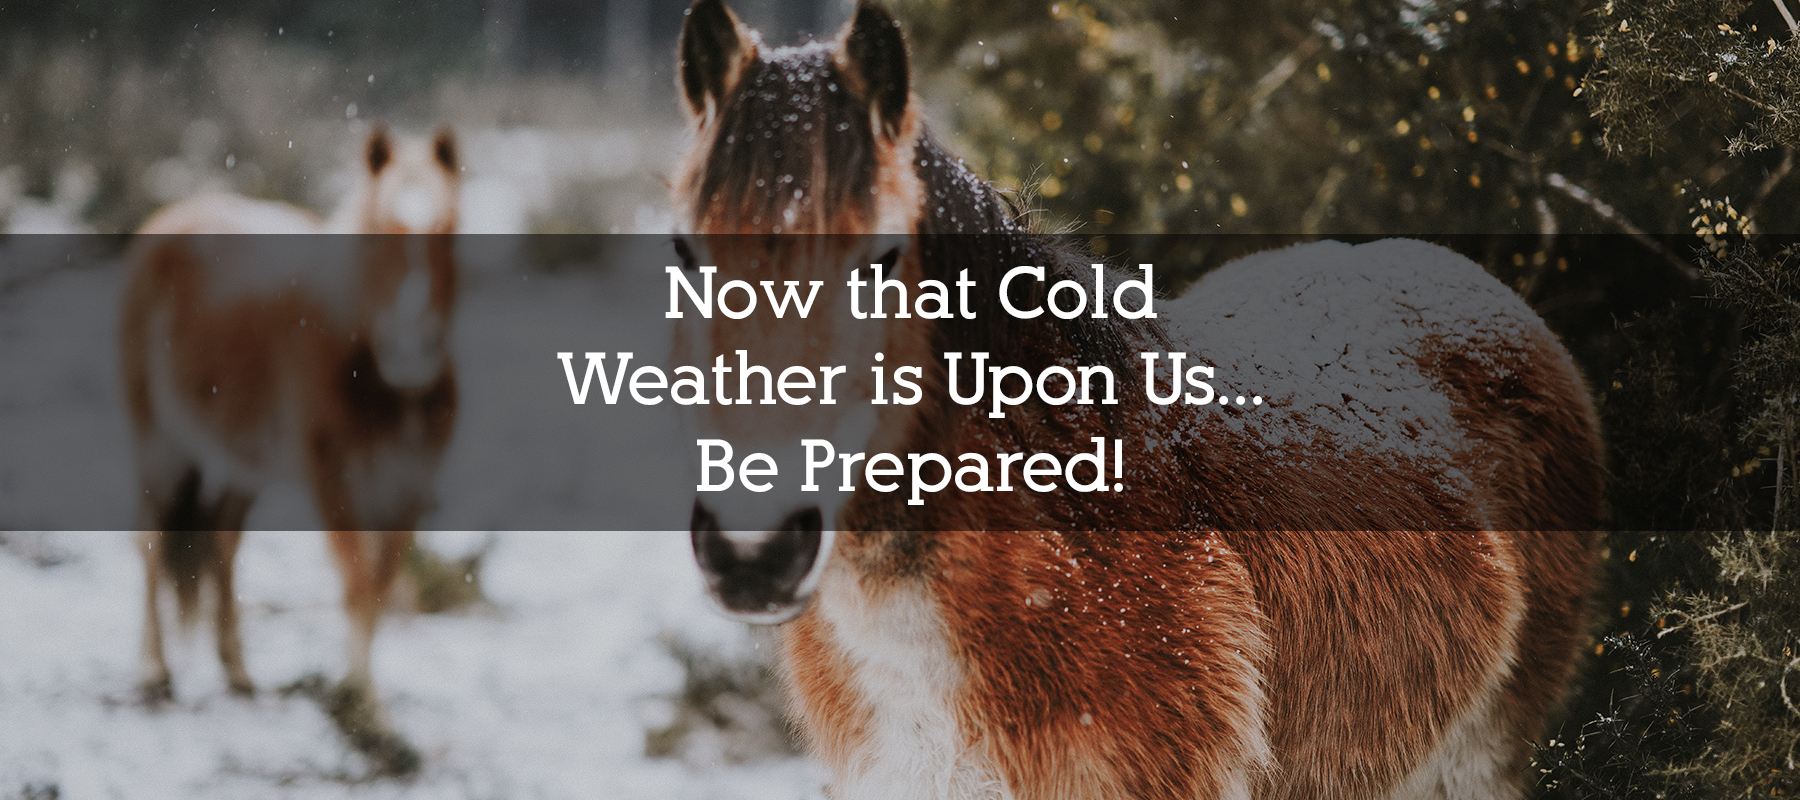 Cold Weather and Winter Tips for your Horse in Colorado